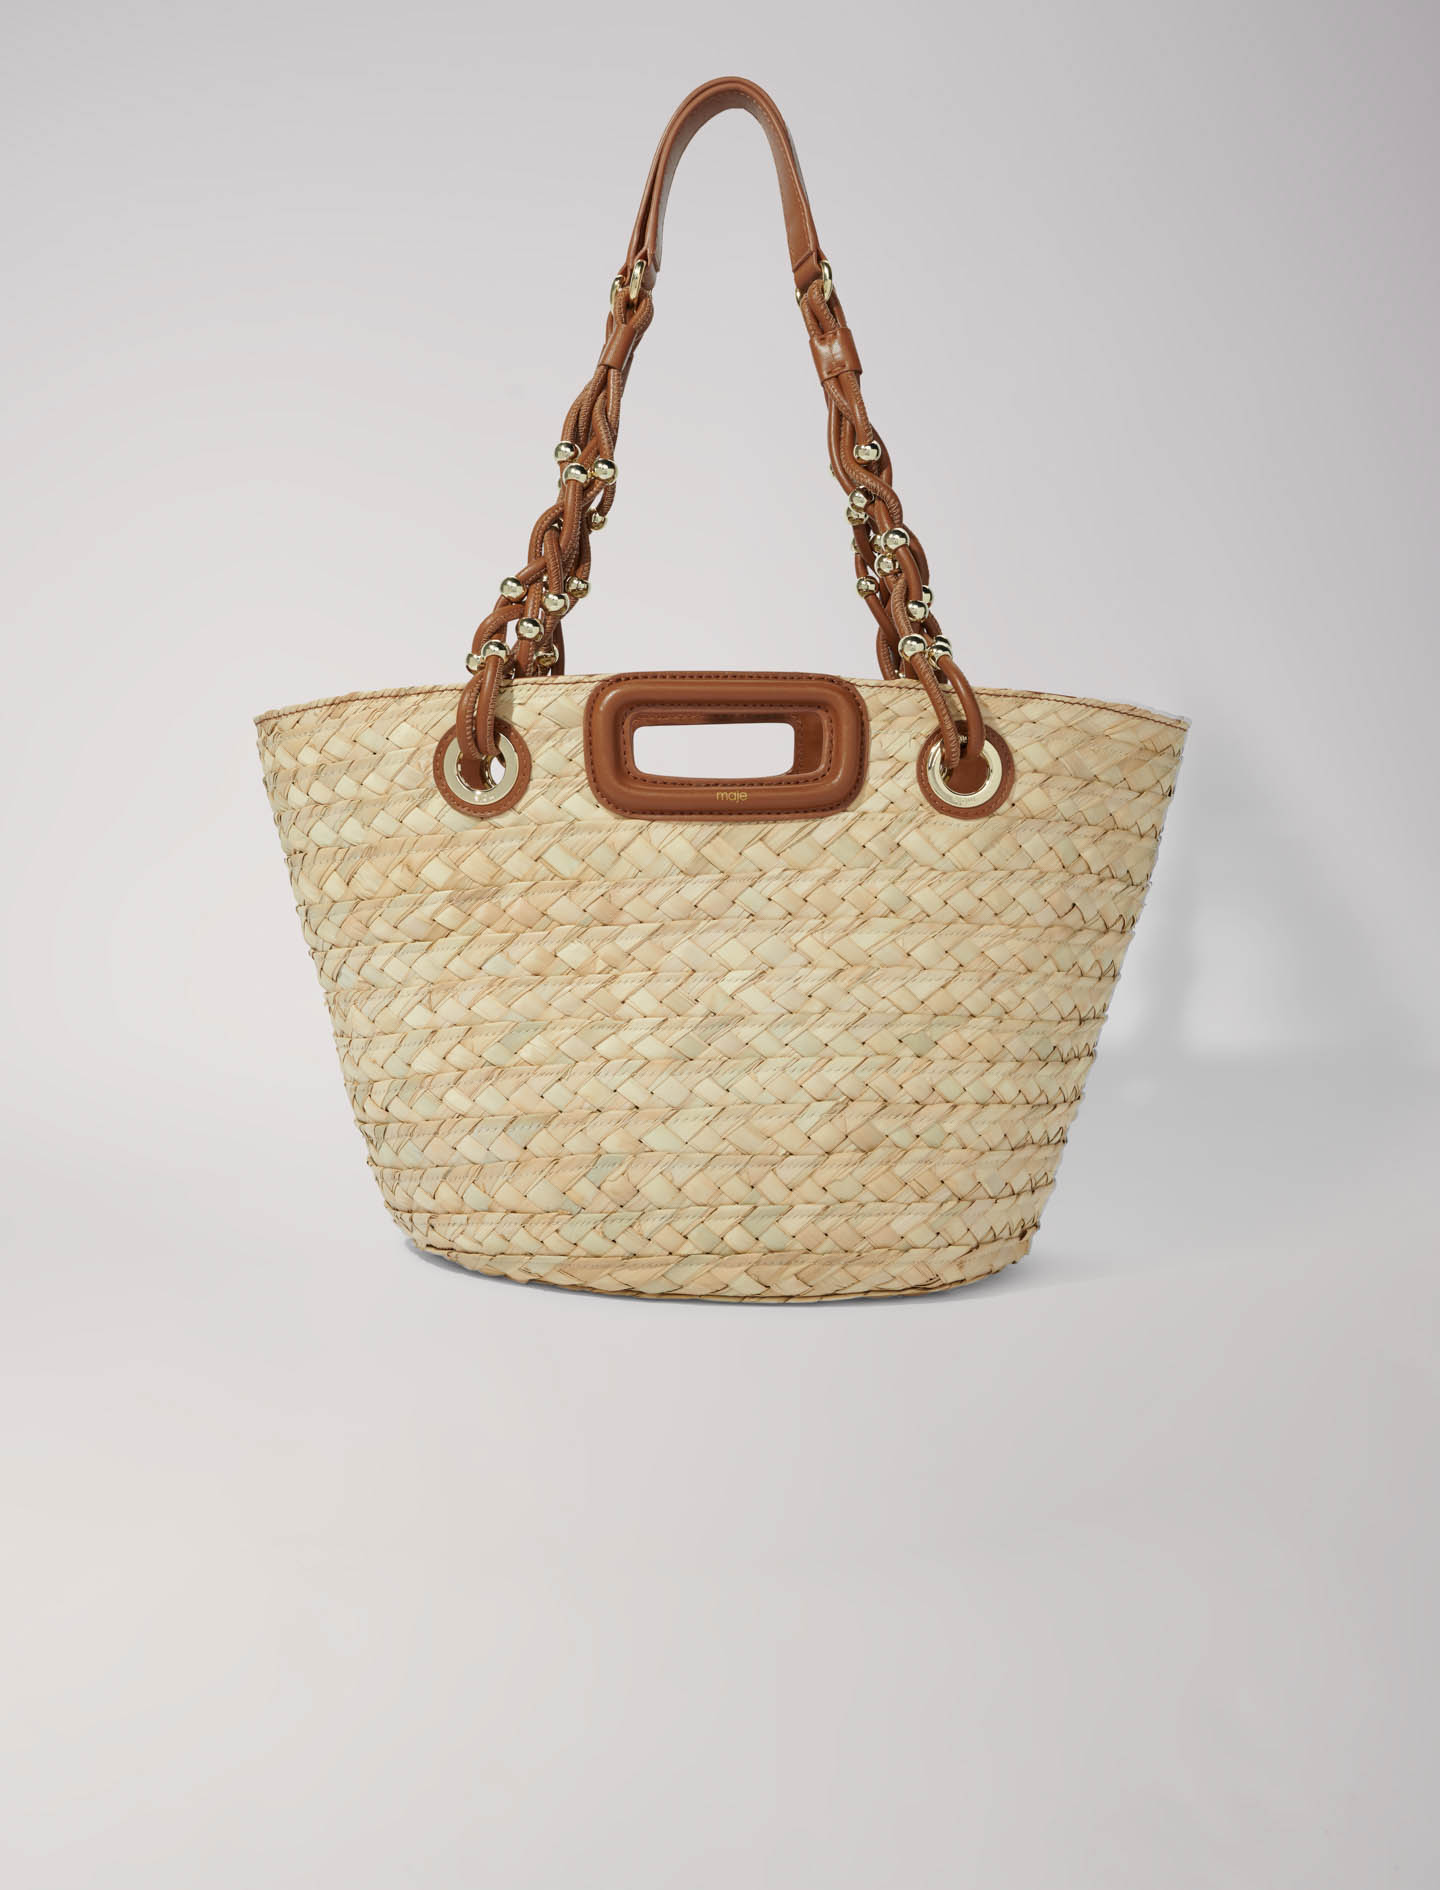 Mixte's palm Lining: Woven raffia basket bag for Spring/Summer, size Mixte-All Bags-OS (ONE SIZE), in color Camel / Brown